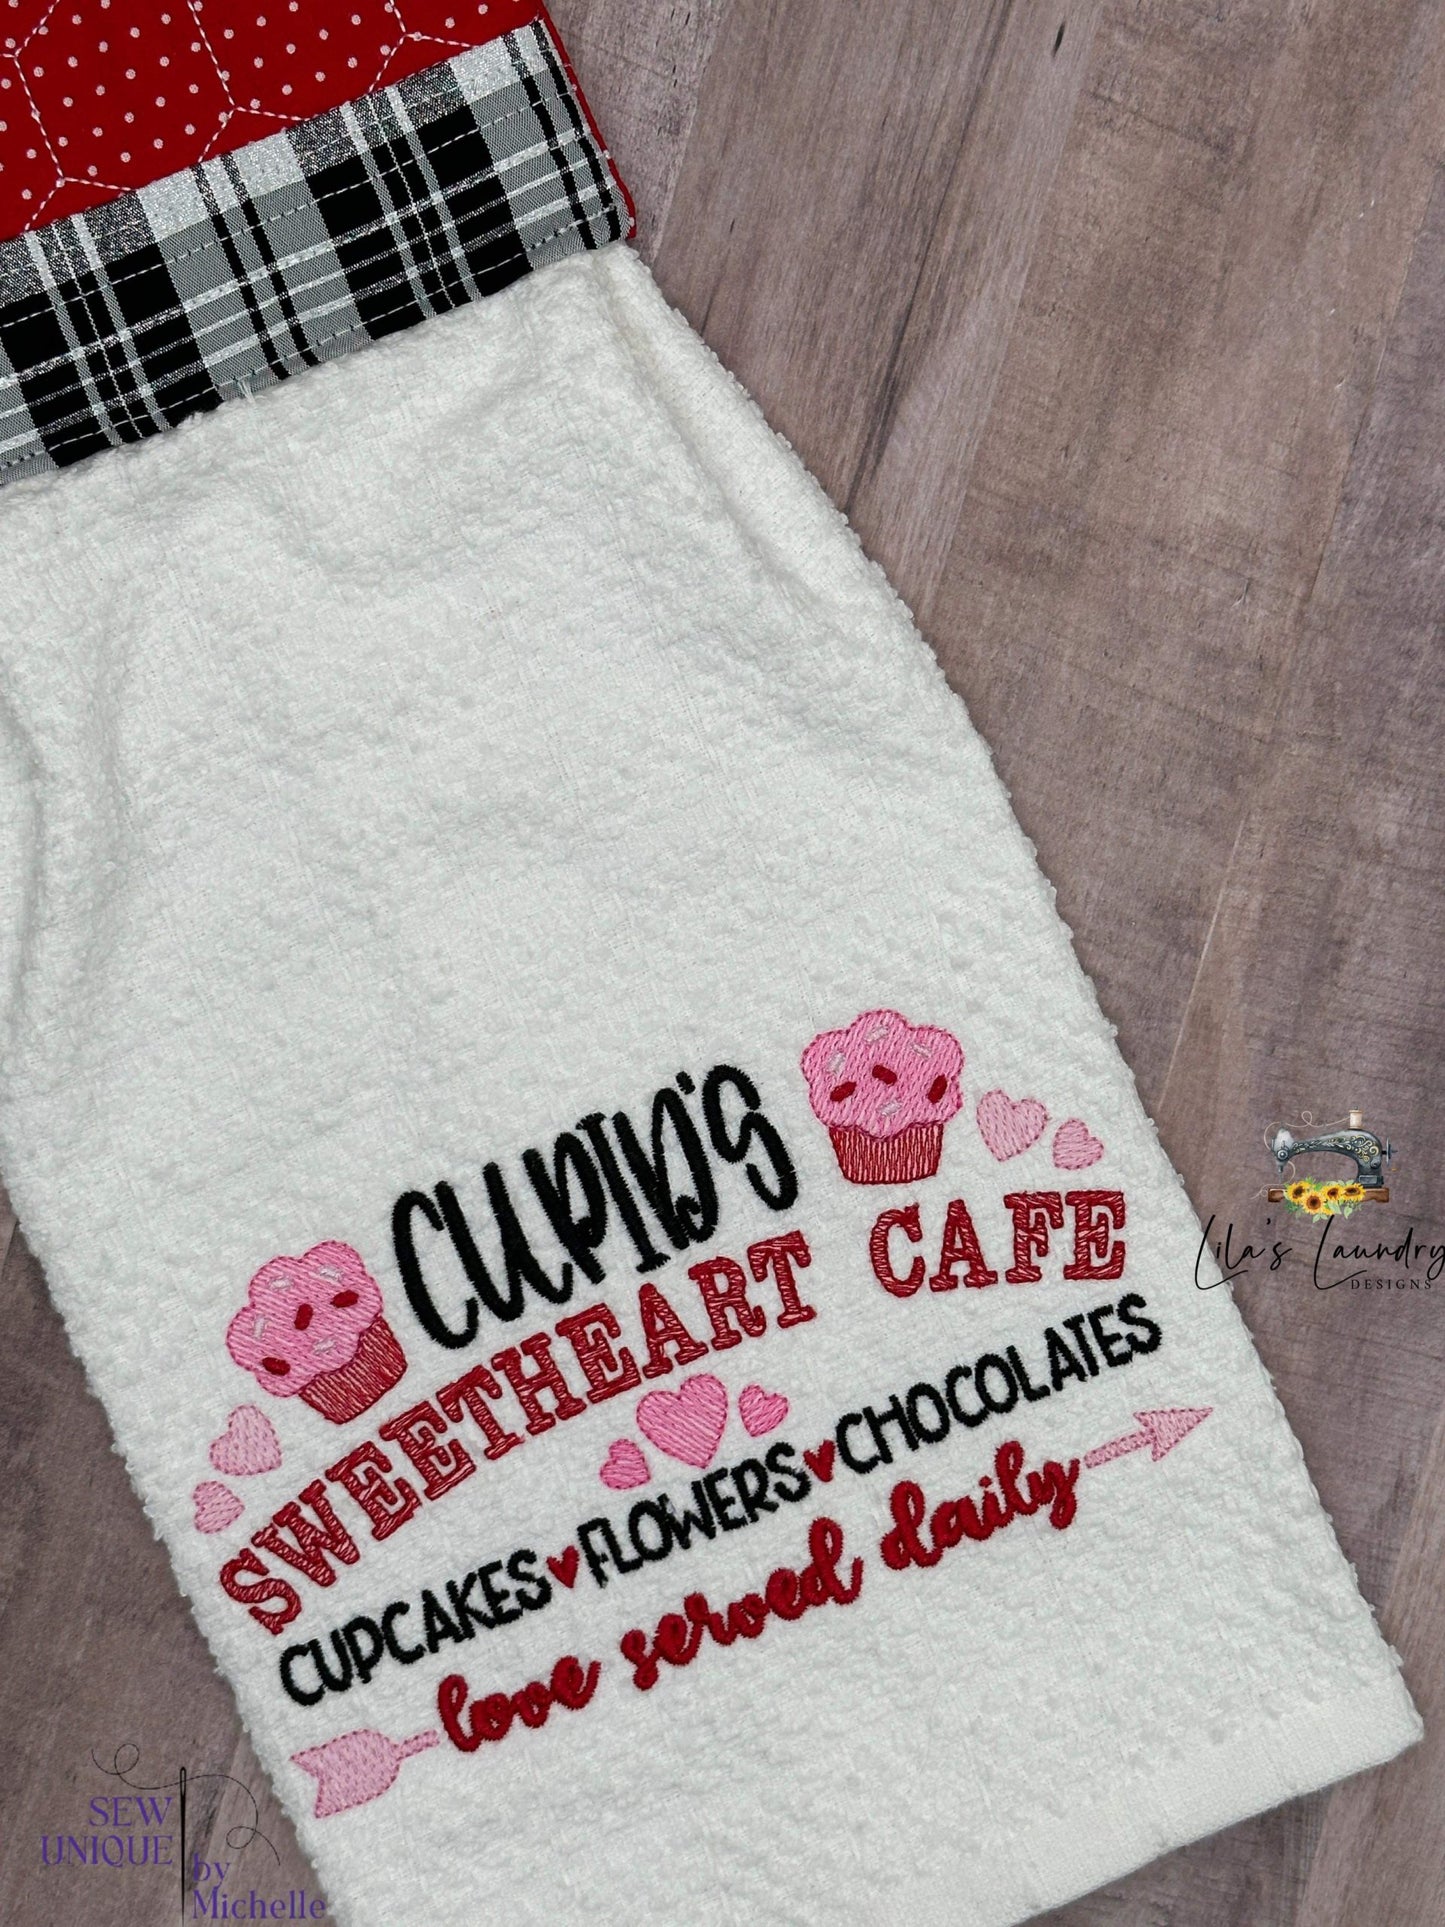 Cupid's Sweetheart Cafe - 2 sizes- Digital Embroidery Design